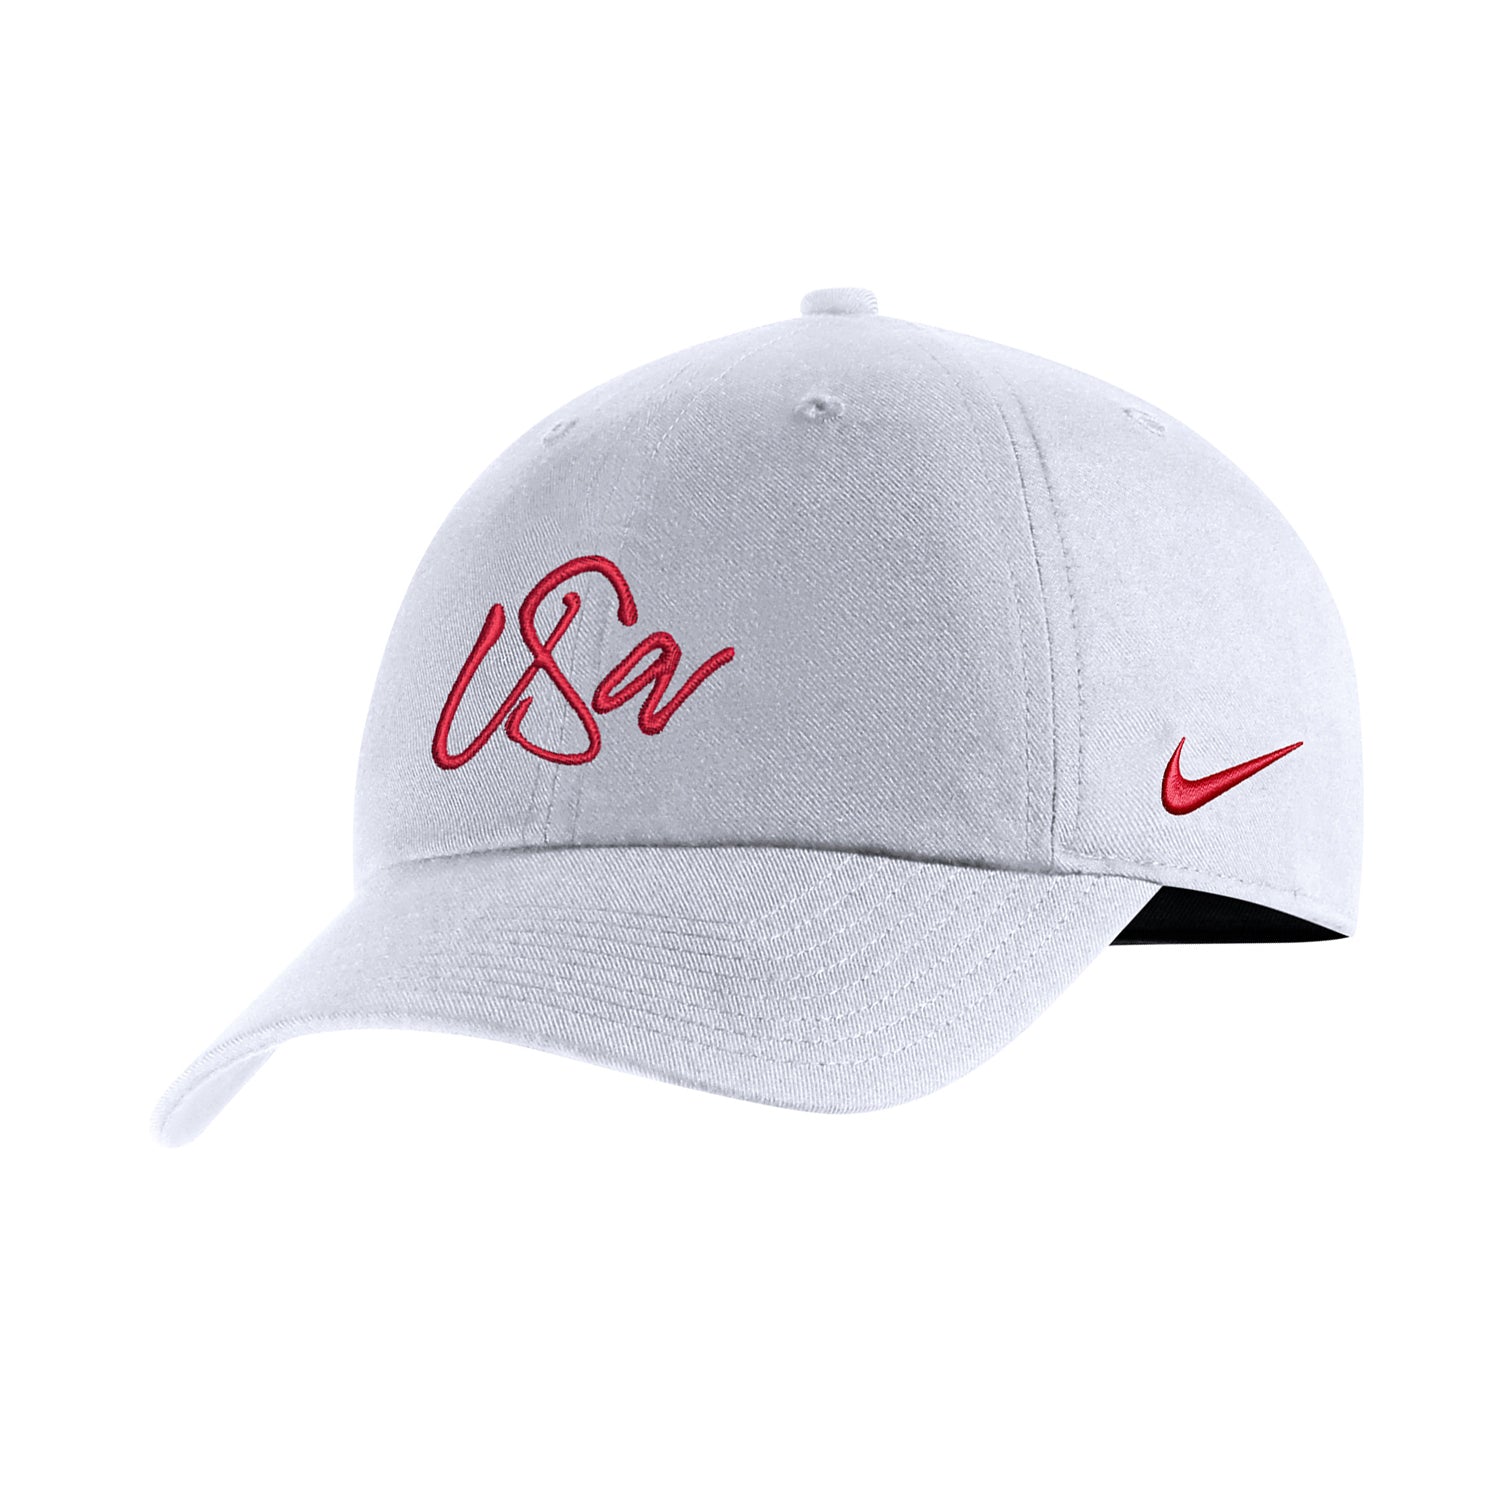 Nike U.S. Hat Script Campus Store Soccer Official USWNT Women\'s -